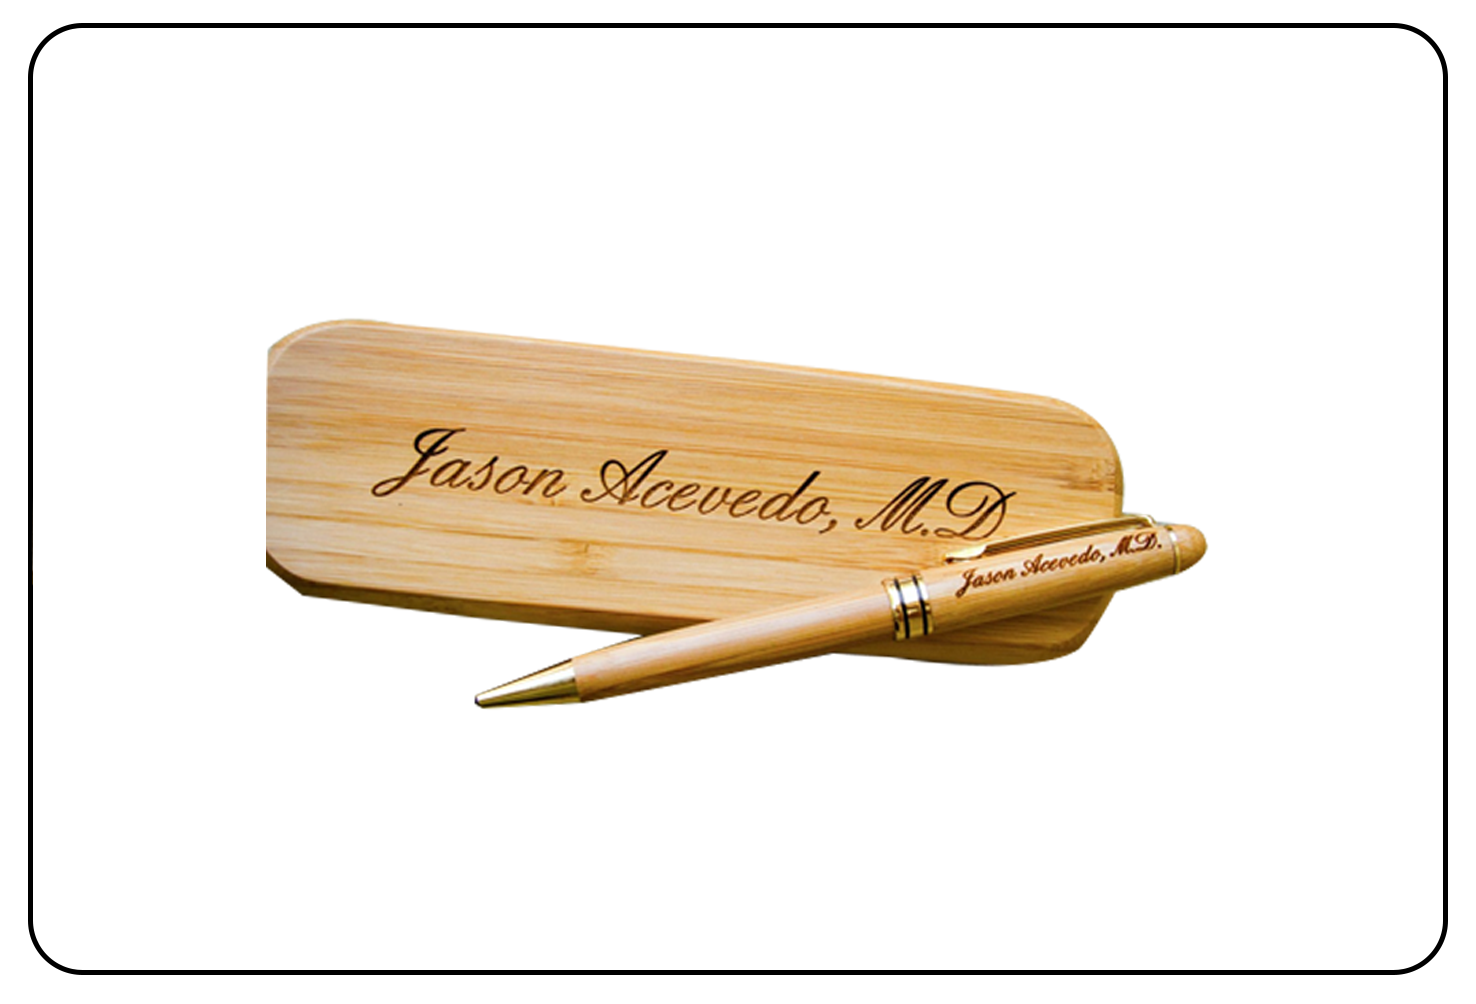 Elegant pen engraving for personalized gifts.